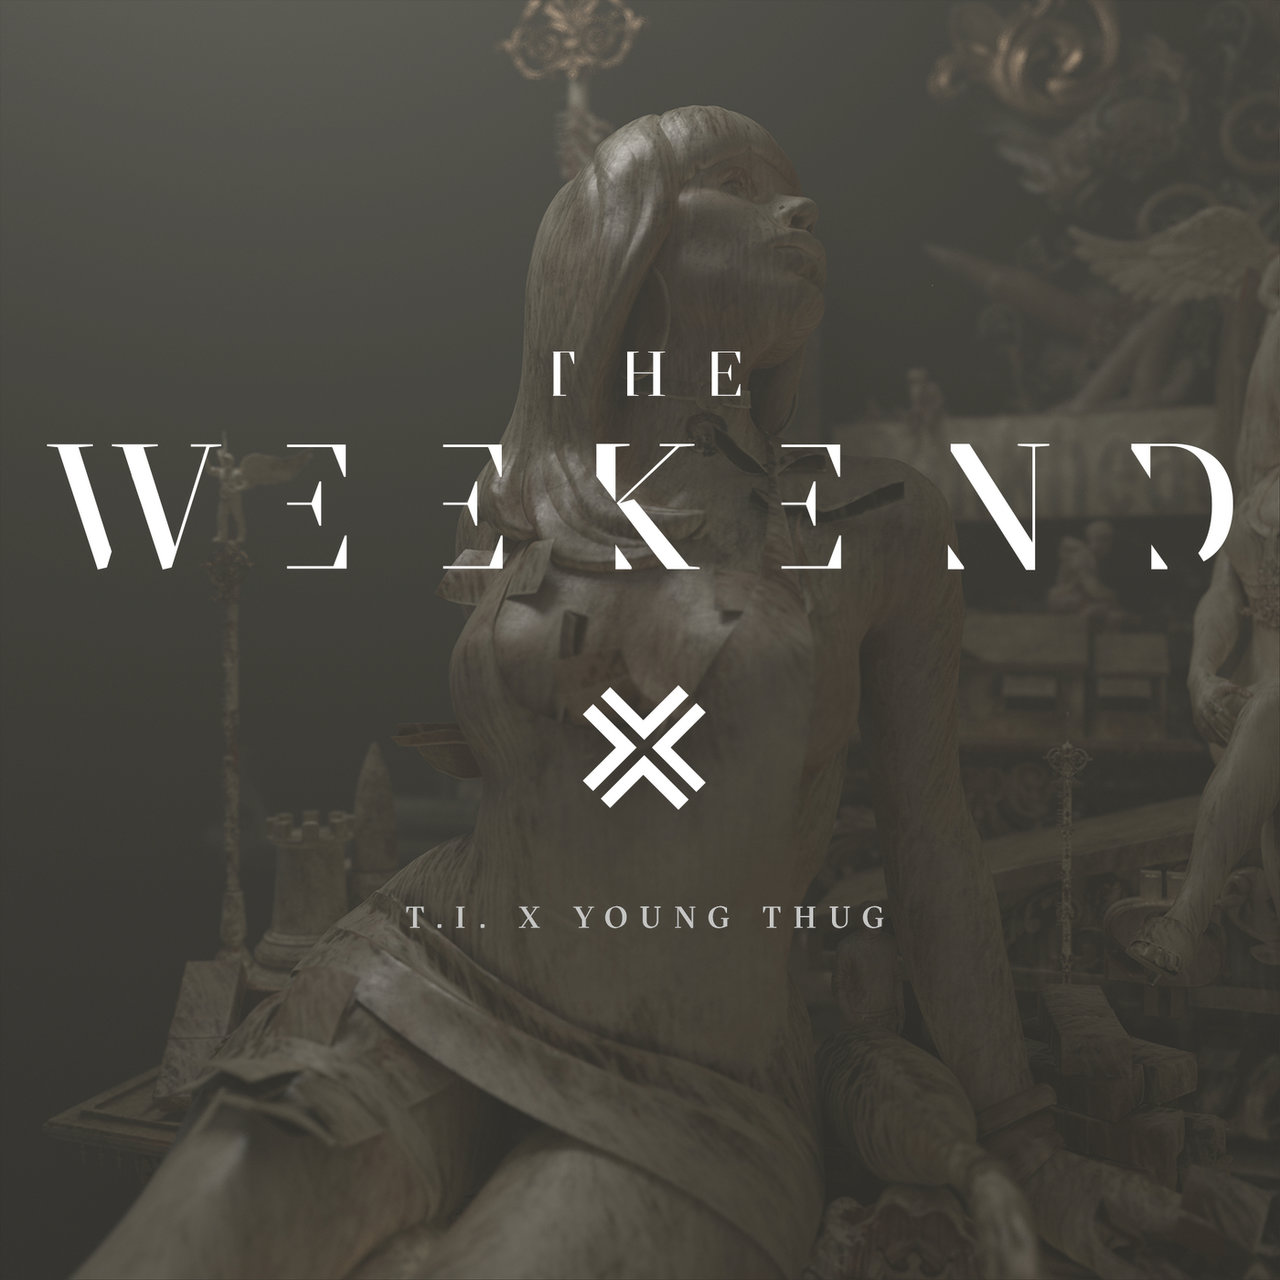 T.I. - The Weekend (ft. Young Thug and Swizz Beatz) (Cover)